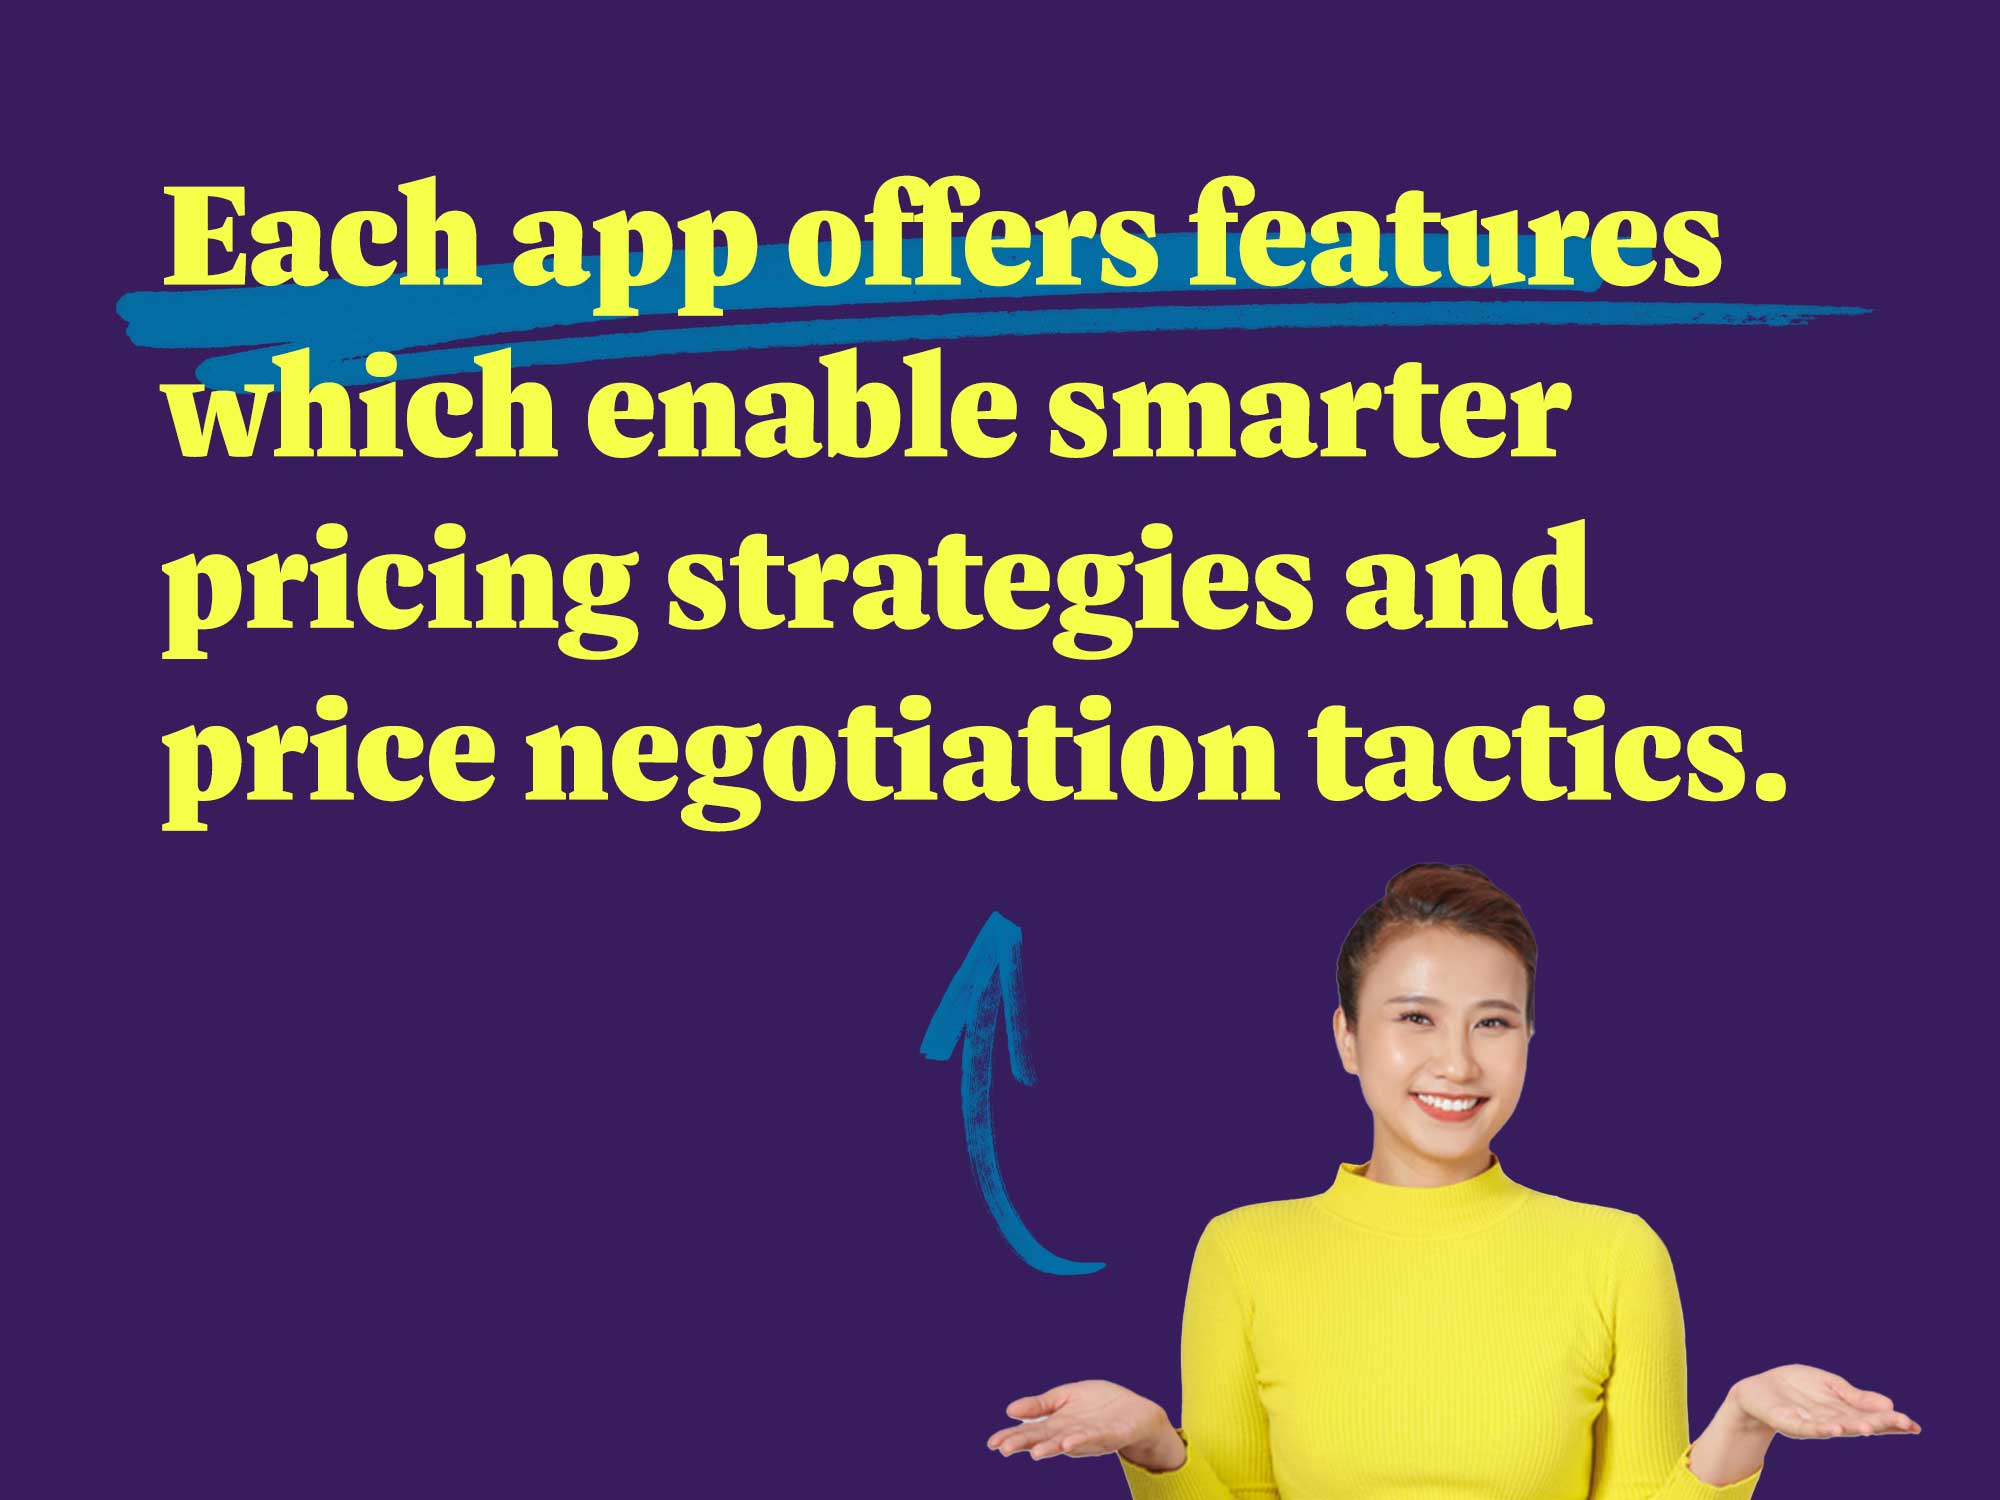 Each app offers features which enable smarter pricing strategies and price negotiation tactics.